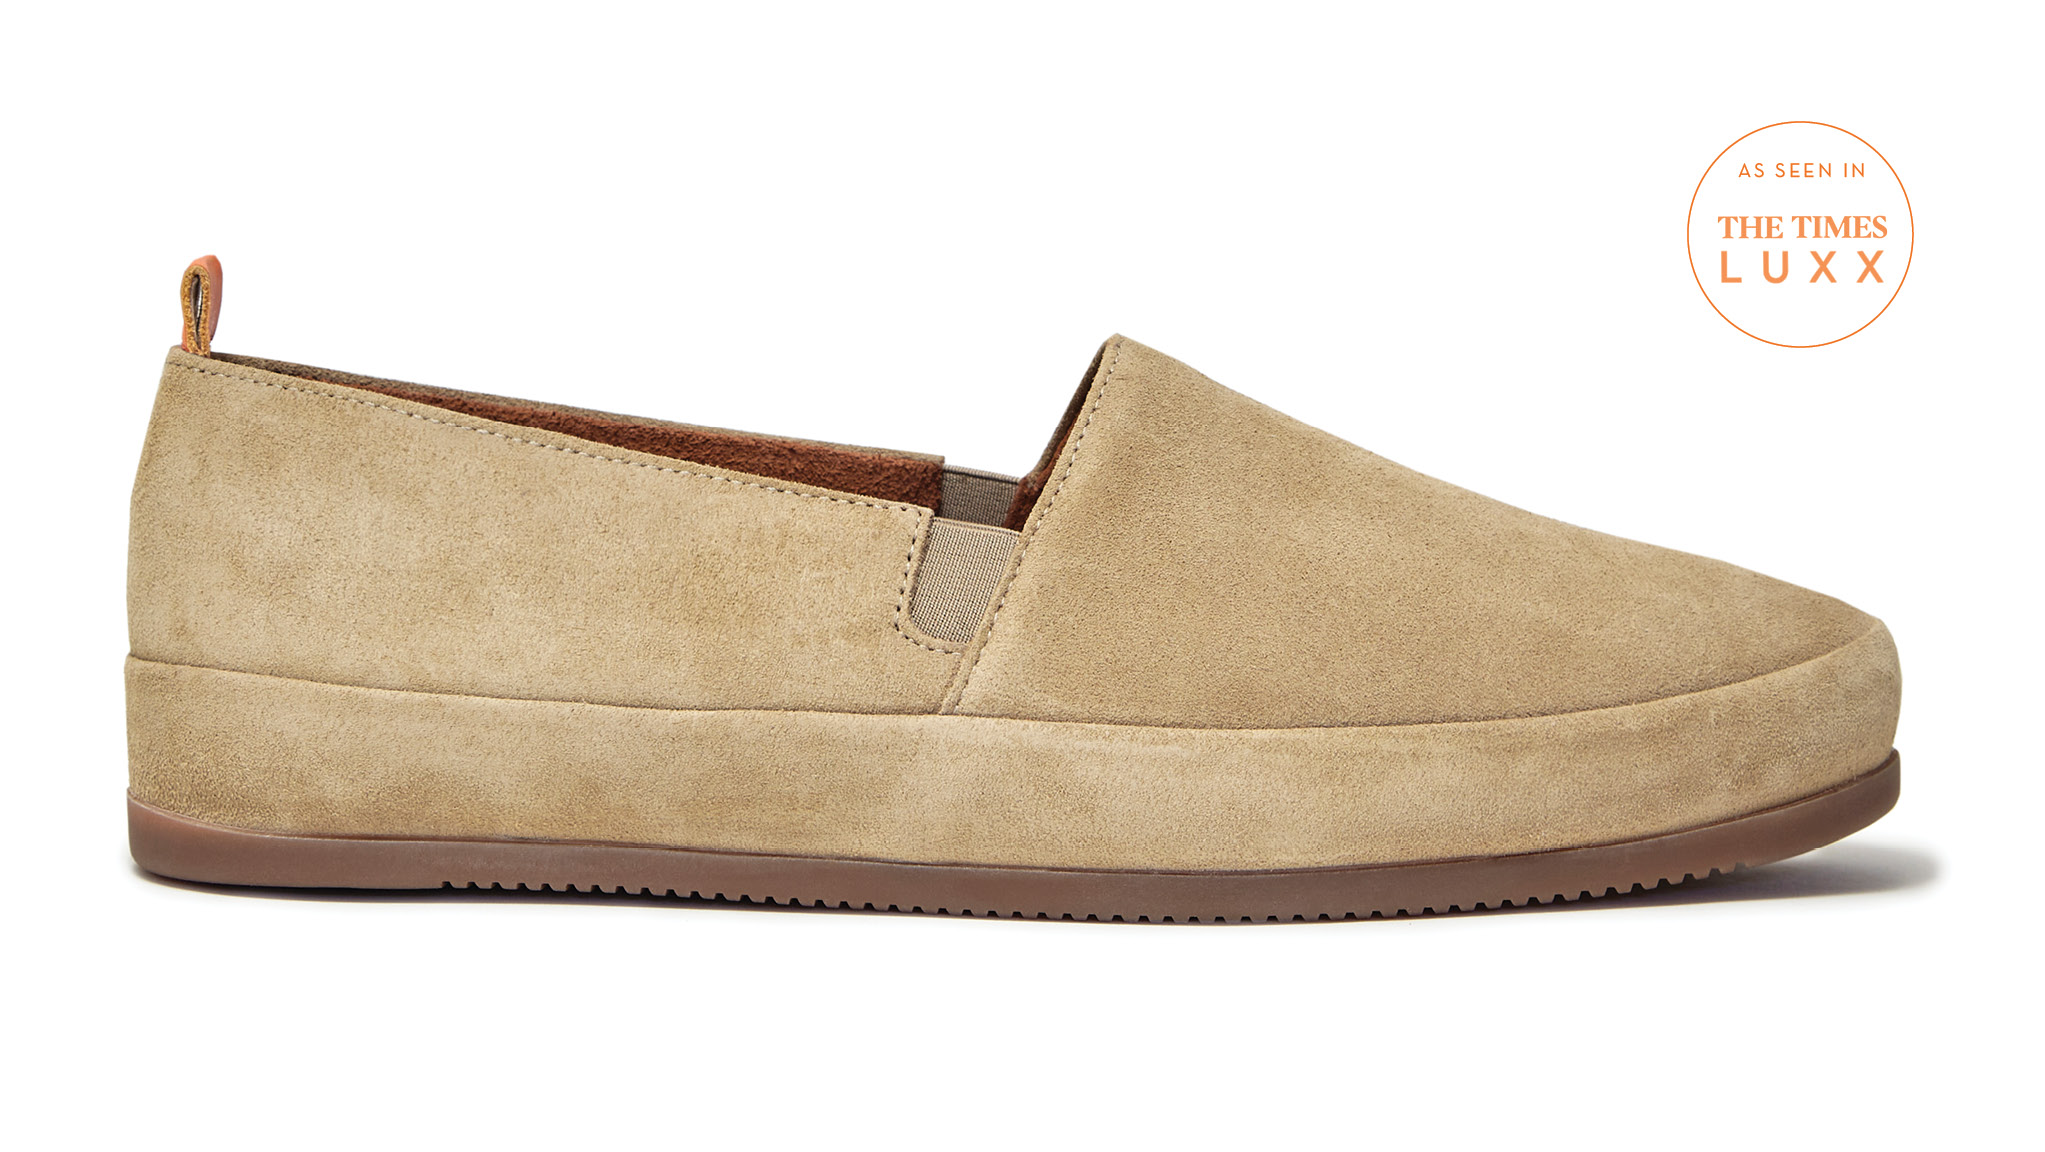 TAN SPLIT SUEDE LOAFERS · Brown · Shoes